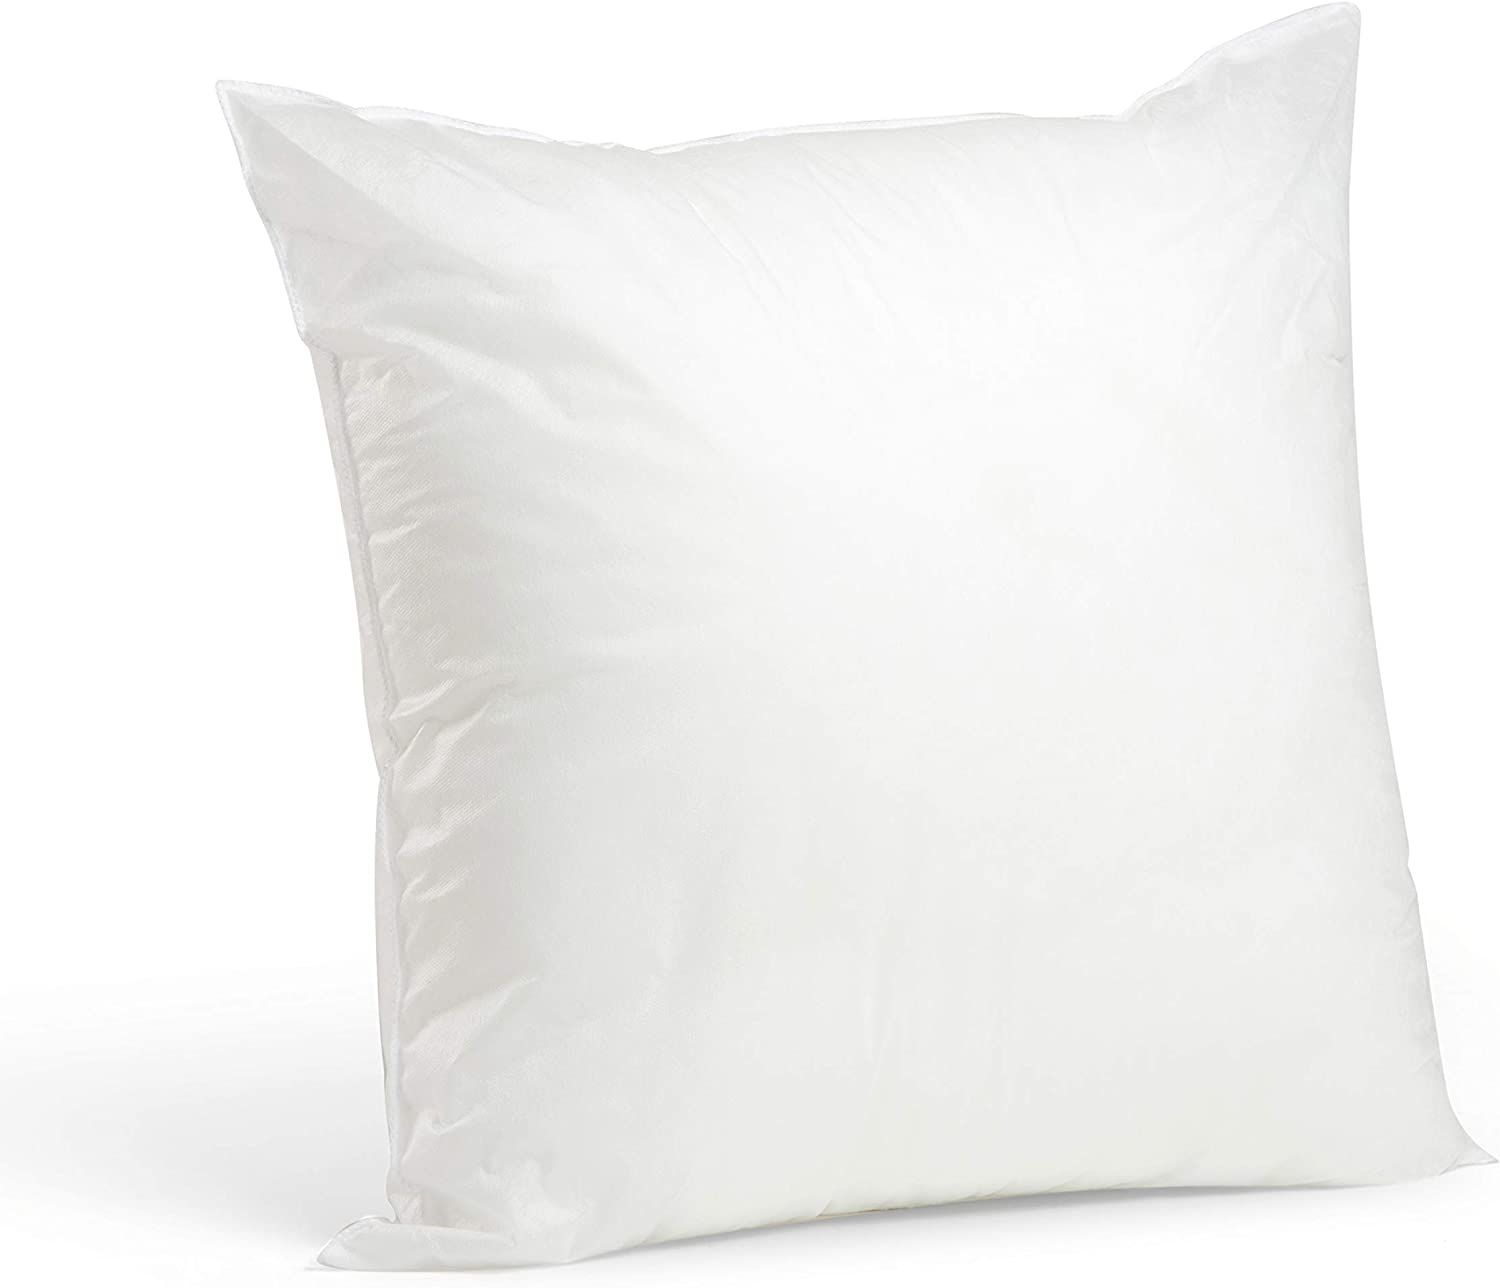 Foamily Throw Pillows Insert 20 x 20 Inches - Bed and Couch Decorative Pillow - Made in USA | Amazon (US)